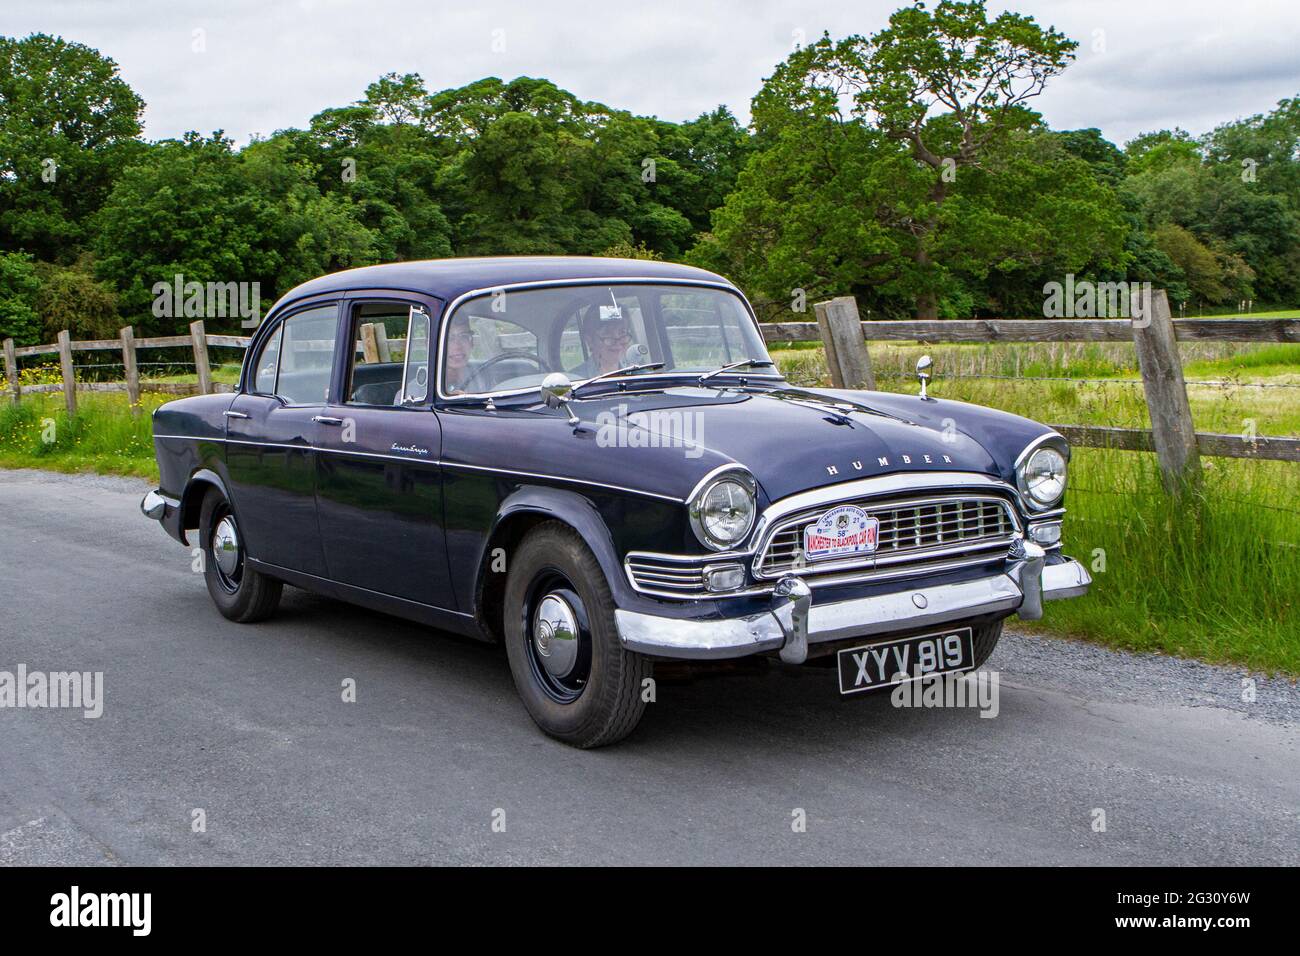 1959 50s blue Humber Super Snipe Series Ii-V at the 58th Annual Manchester to Blackpool Vintage & Classic Car Run The event is a ‘Touring Assembly’ Stock Photo